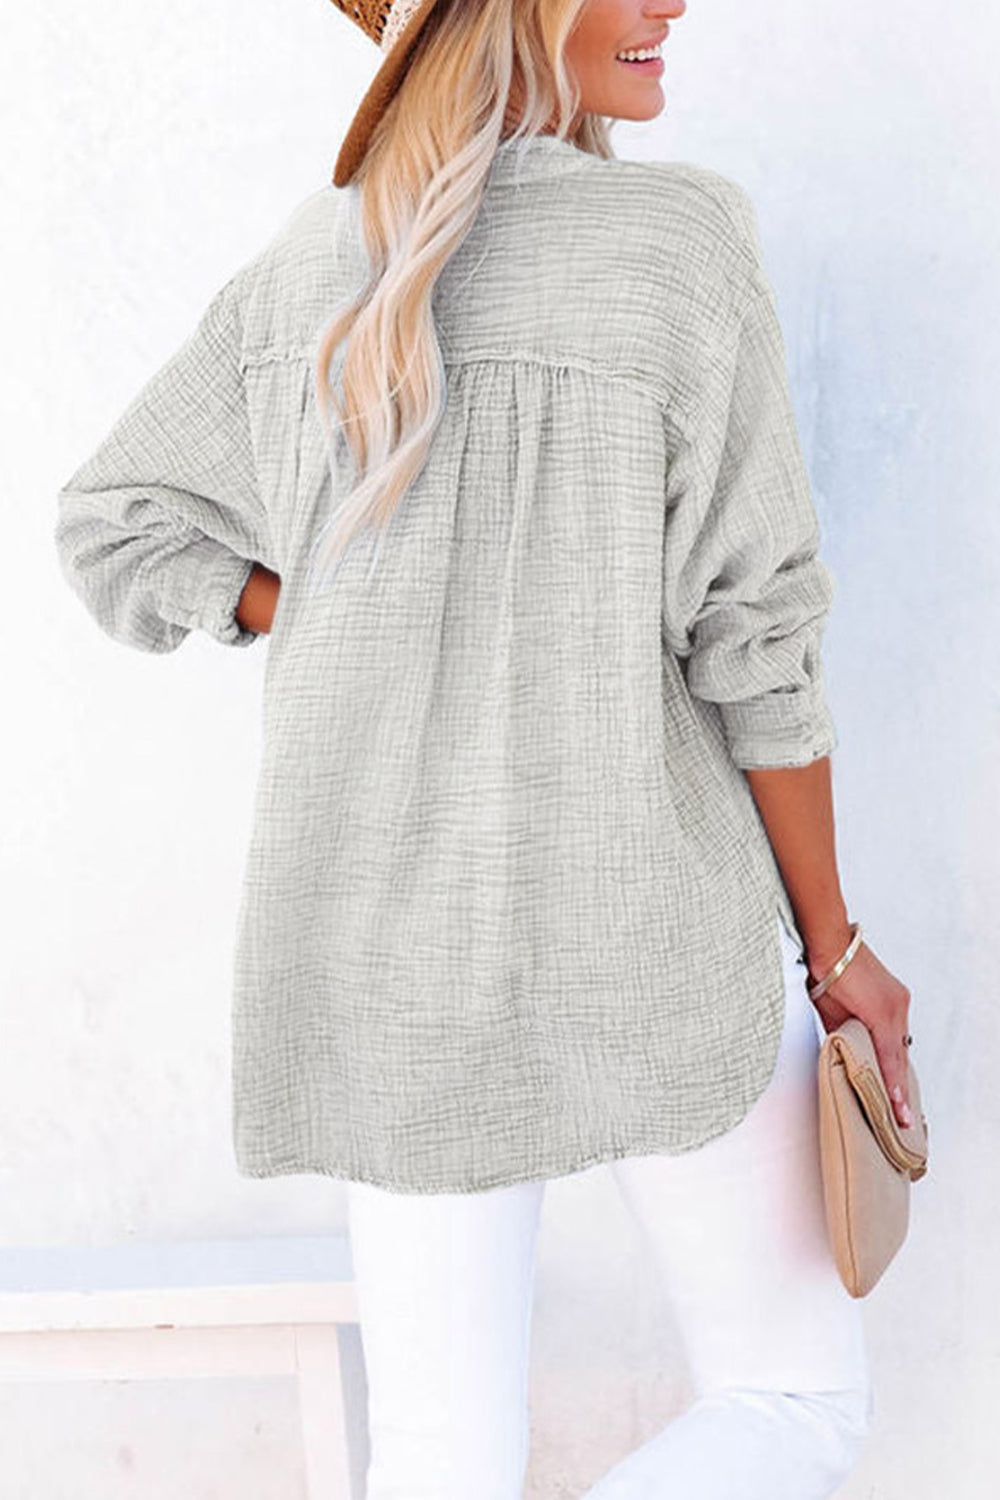 Back View, Buttoned Long Sleeve Blouse In Gray